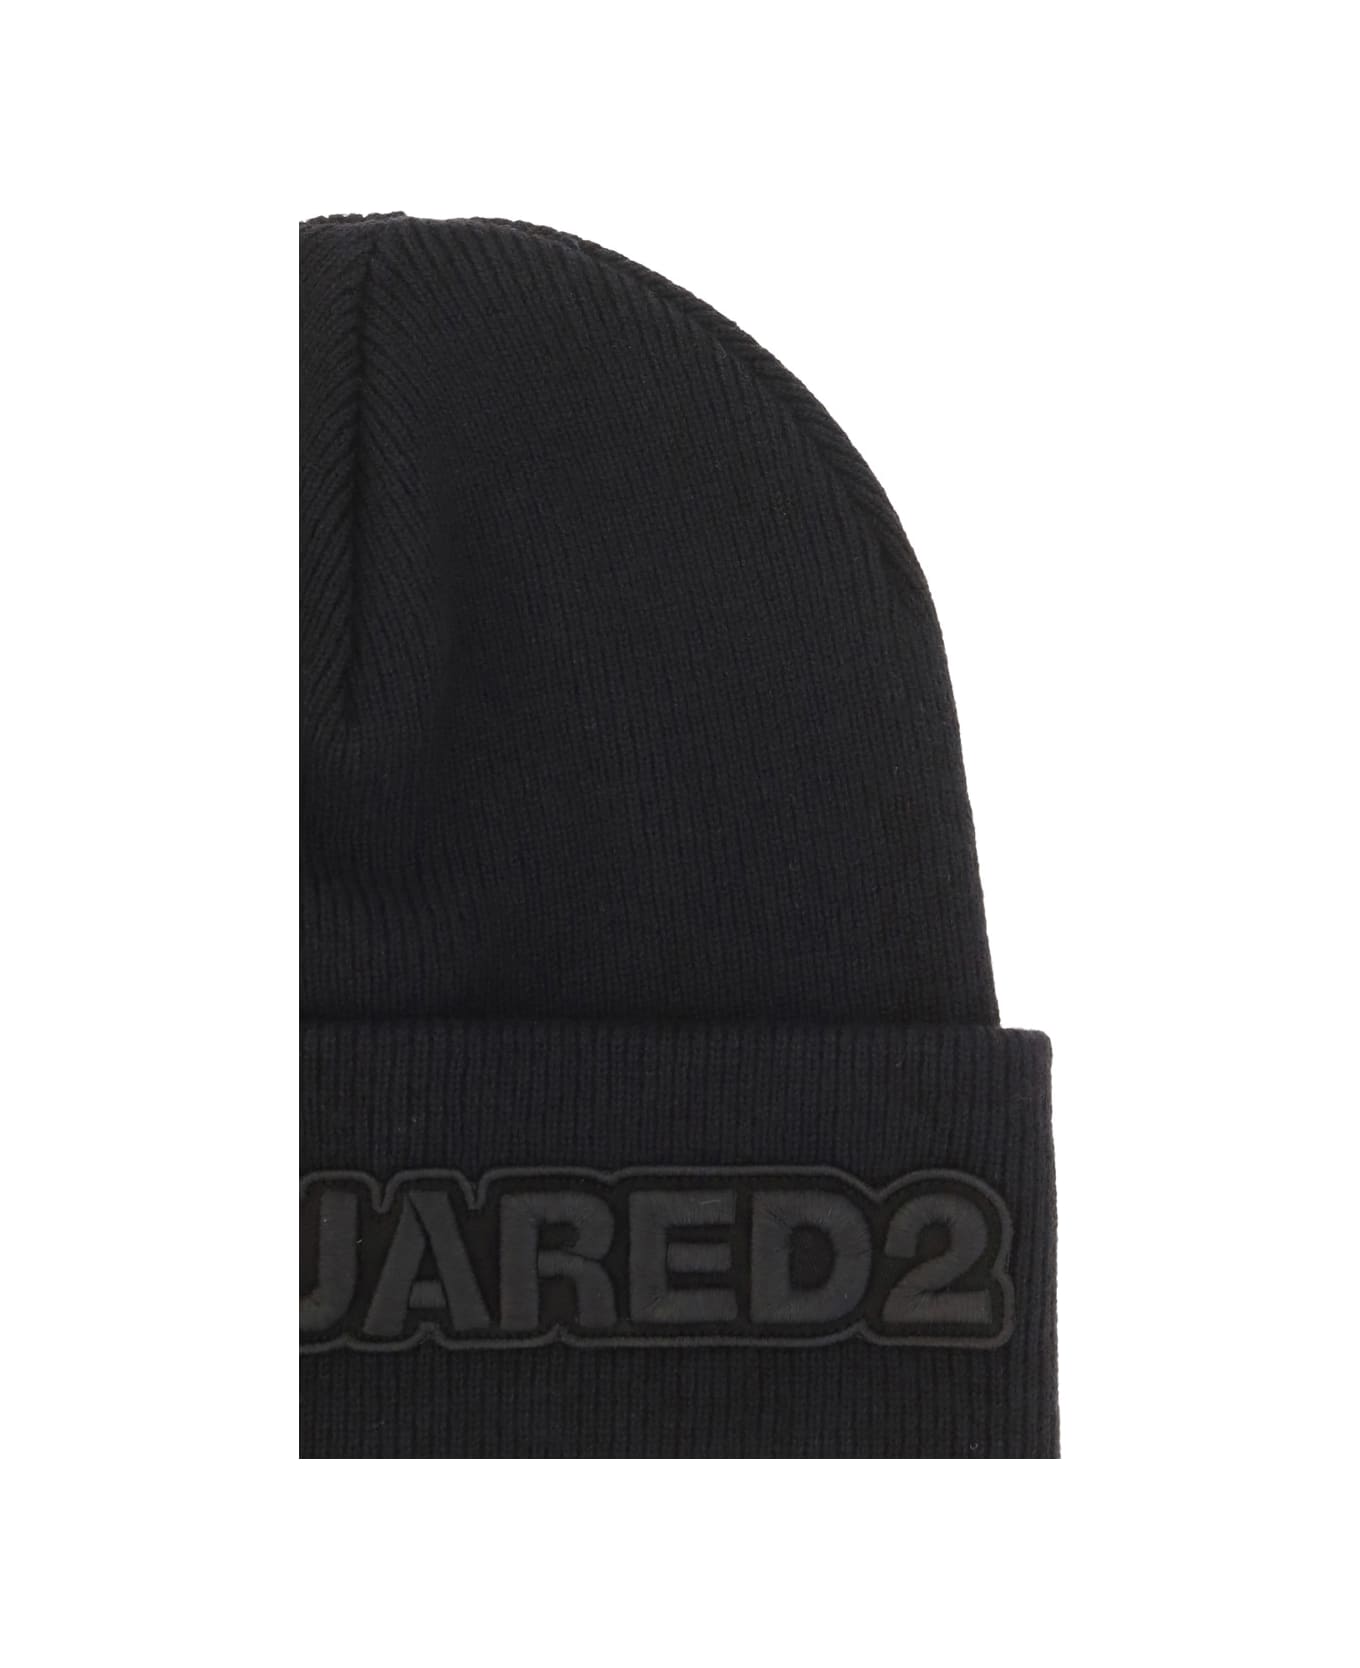 Dsquared2 Logo Embroidered Knit Beanie - M084